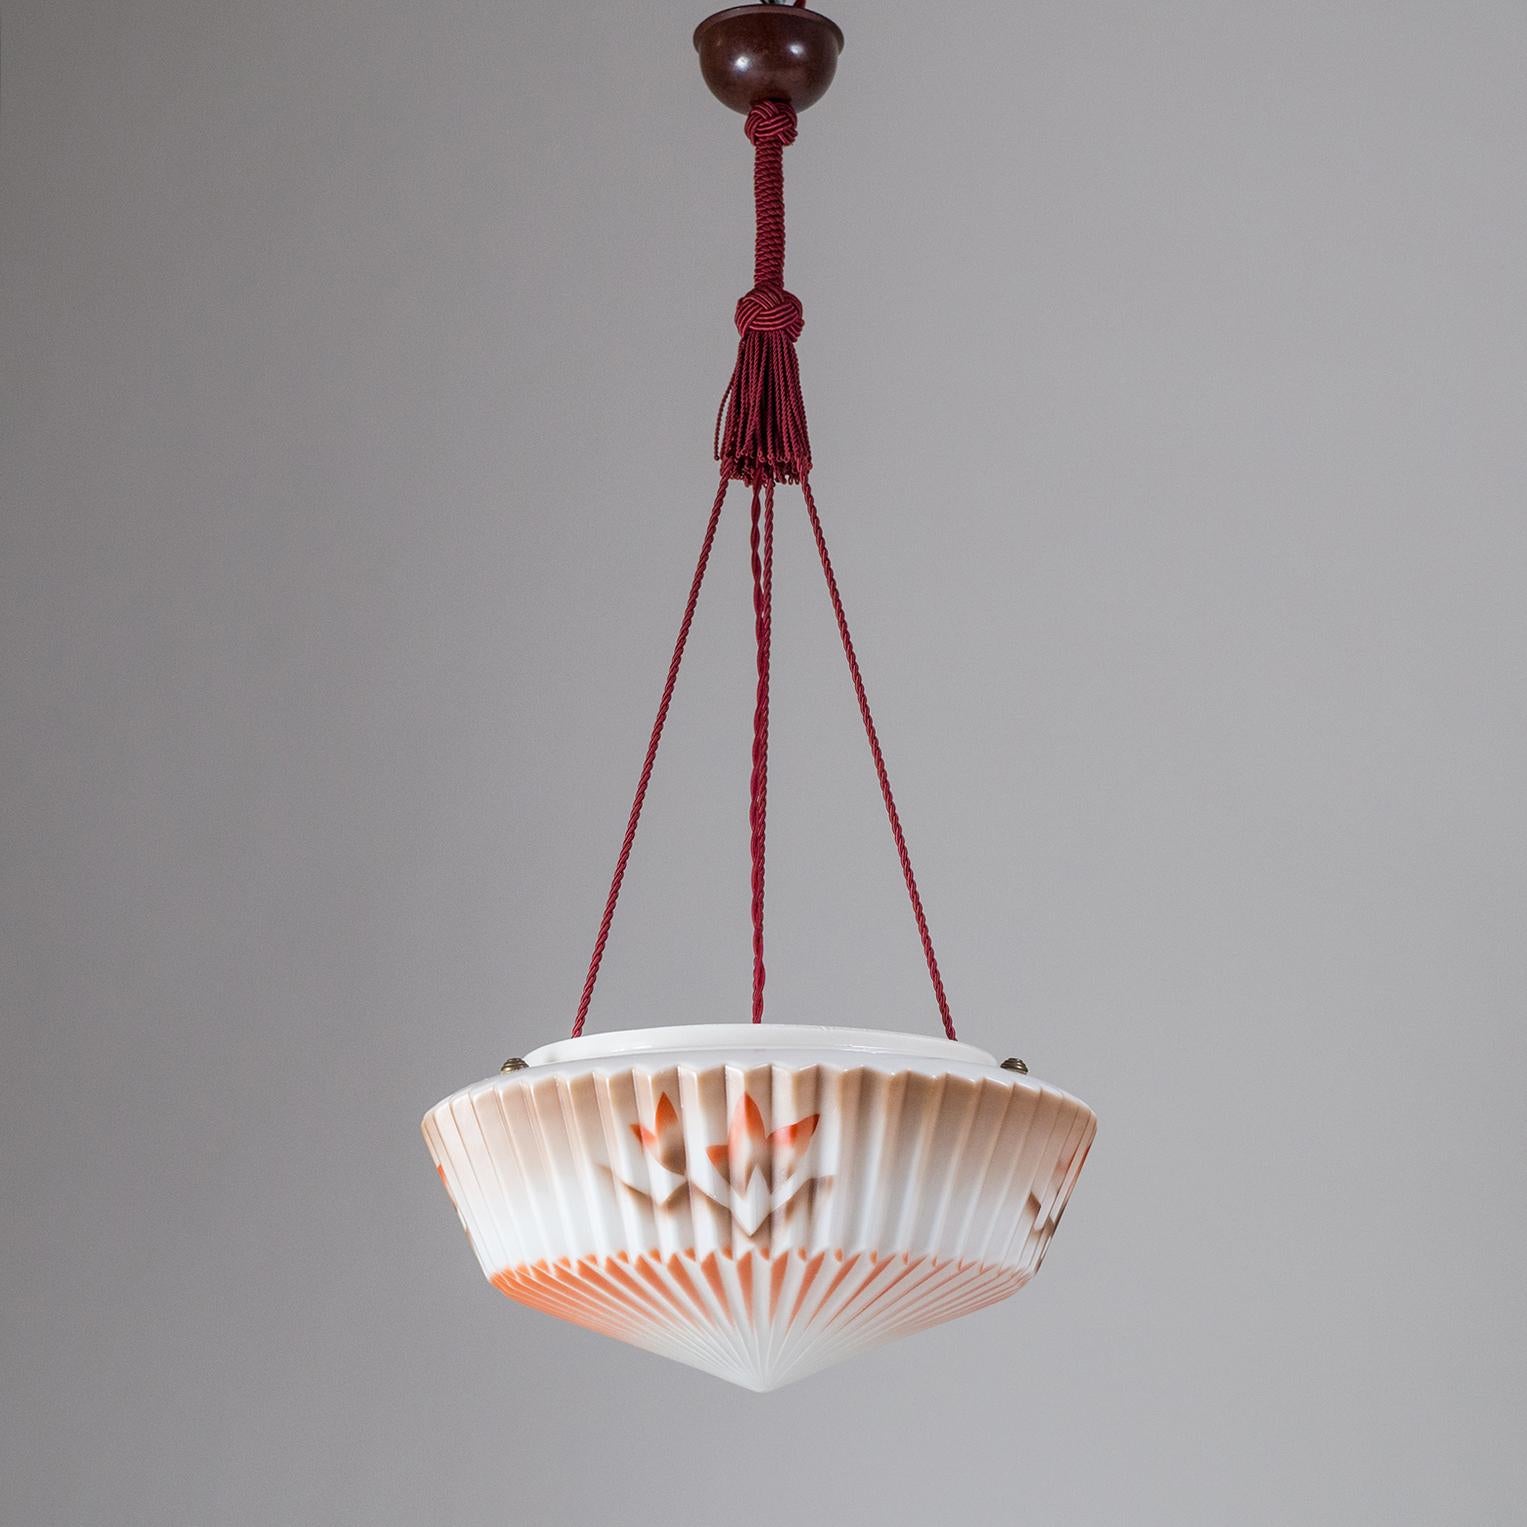 Very unique Art Deco suspension lamp, circa 1930. A large 'pleated' glass bowl is suspended by bordeaux colored cords with matching tassels and a bakelite canopy. The diffuser has an intricate dual color 'aerography' decor, accentuating the pleated